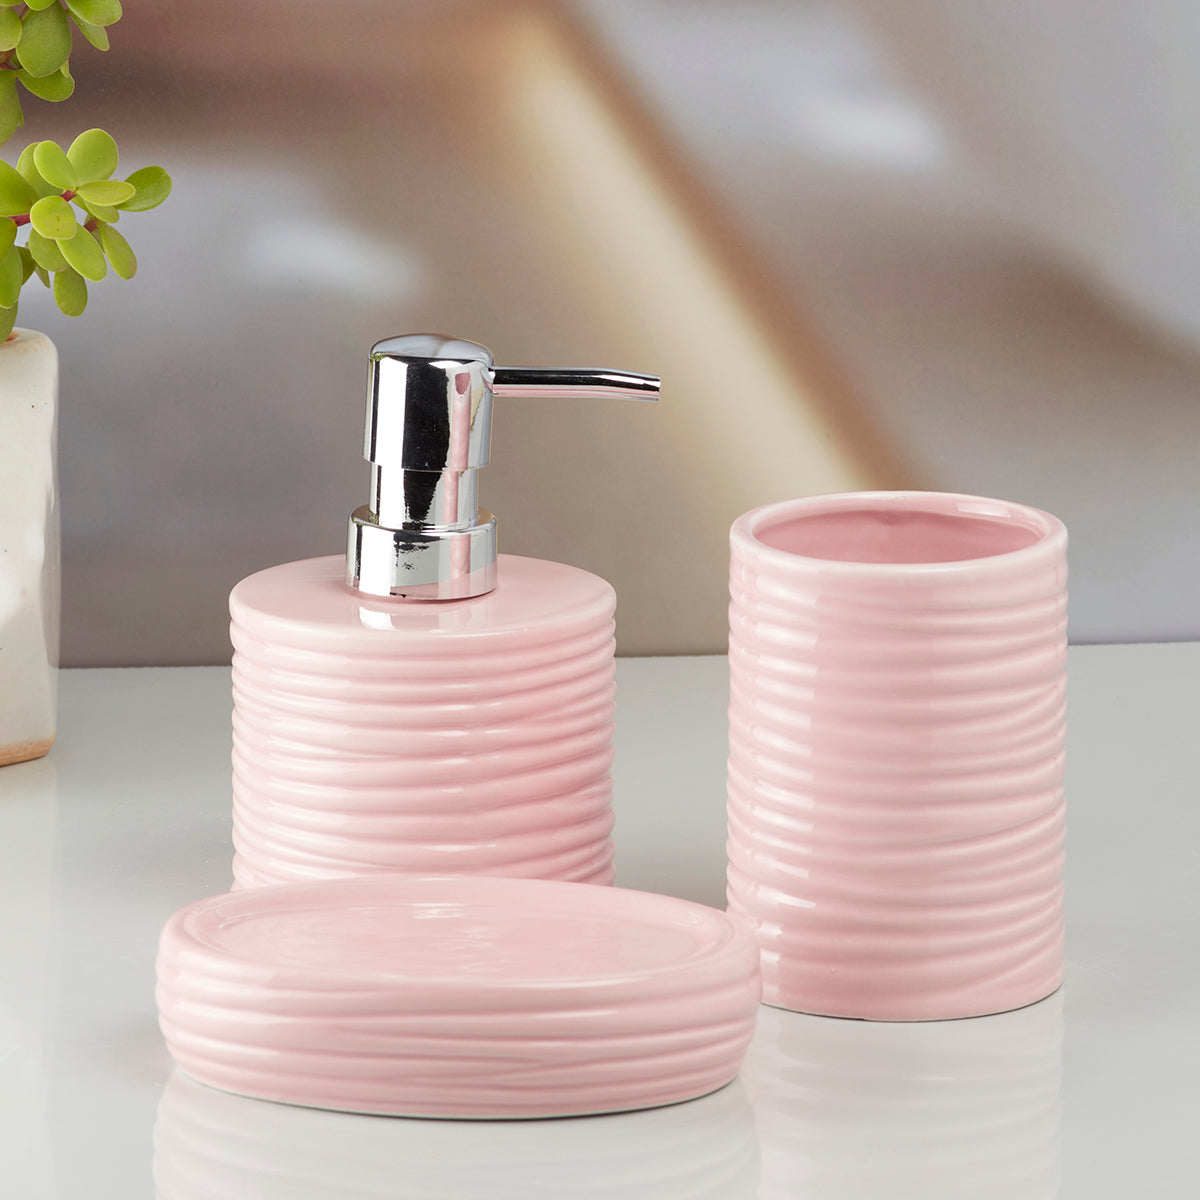 Kookee Ceramic Bathroom Accessories Set of 3, Modern Bath Set with Liquid handwash Soap Dispenser and Toothbrush holder, Luxury Gift Accessory for Home, Pink (10196)